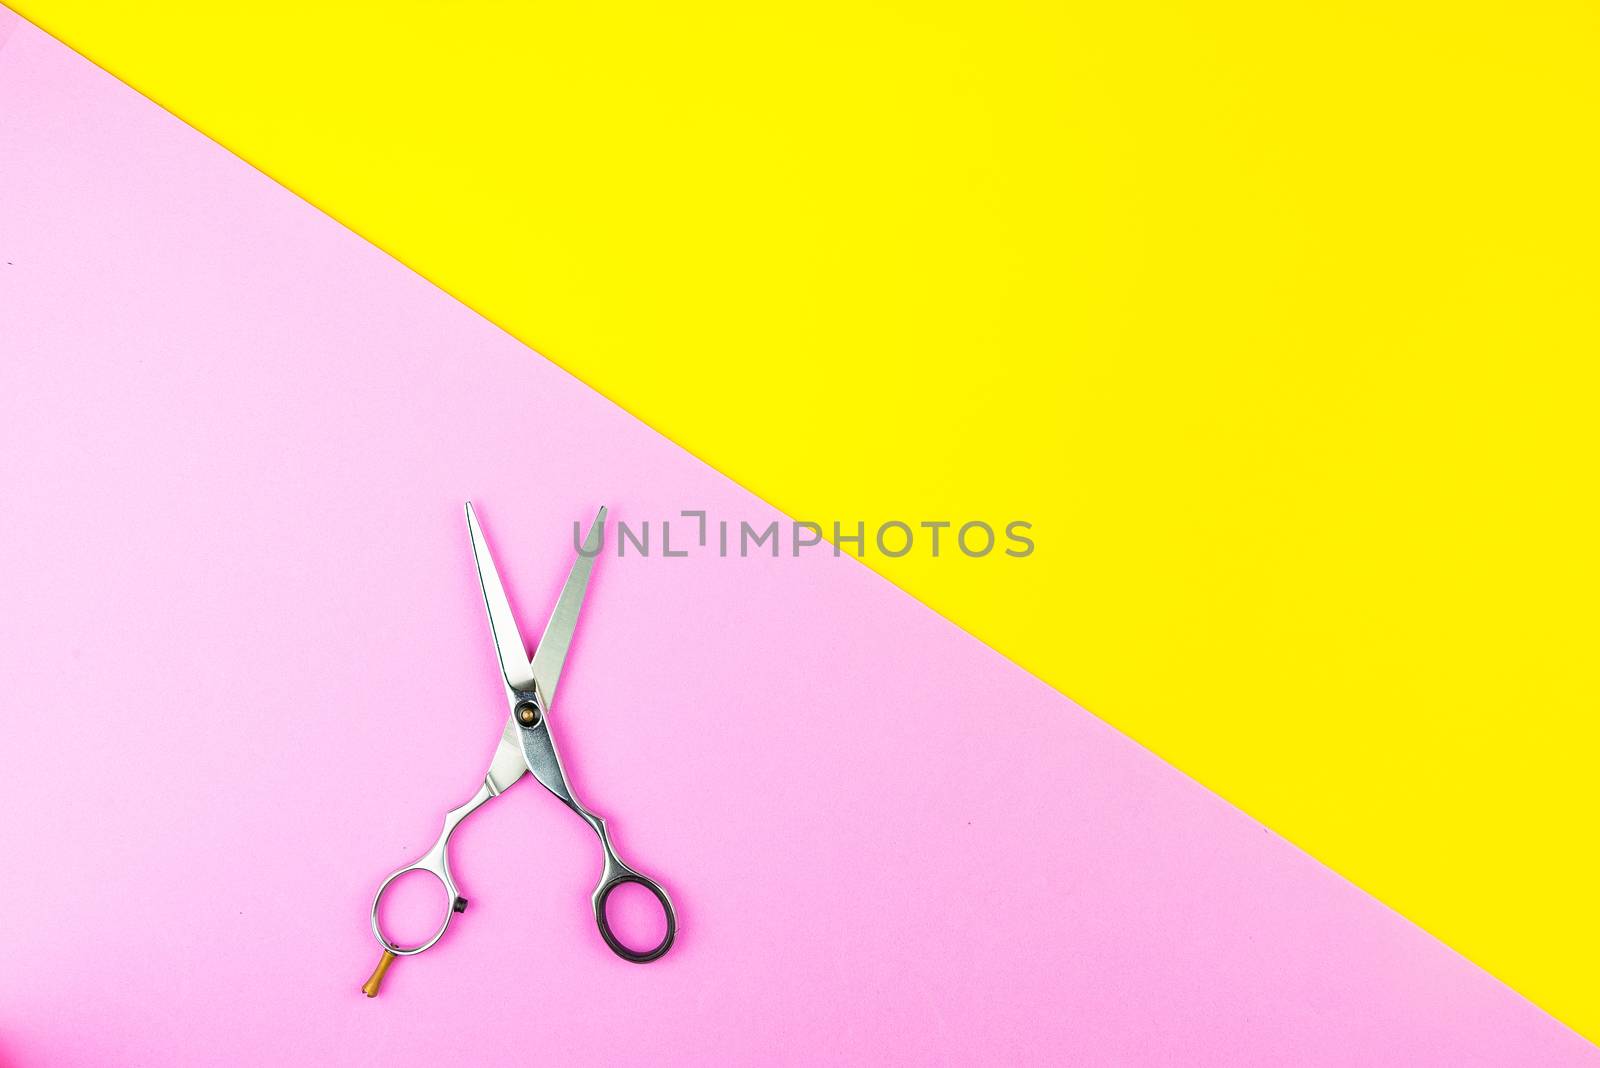 Stylish Professional Barber Scissors on yellow and pink backgrou by Bubbers